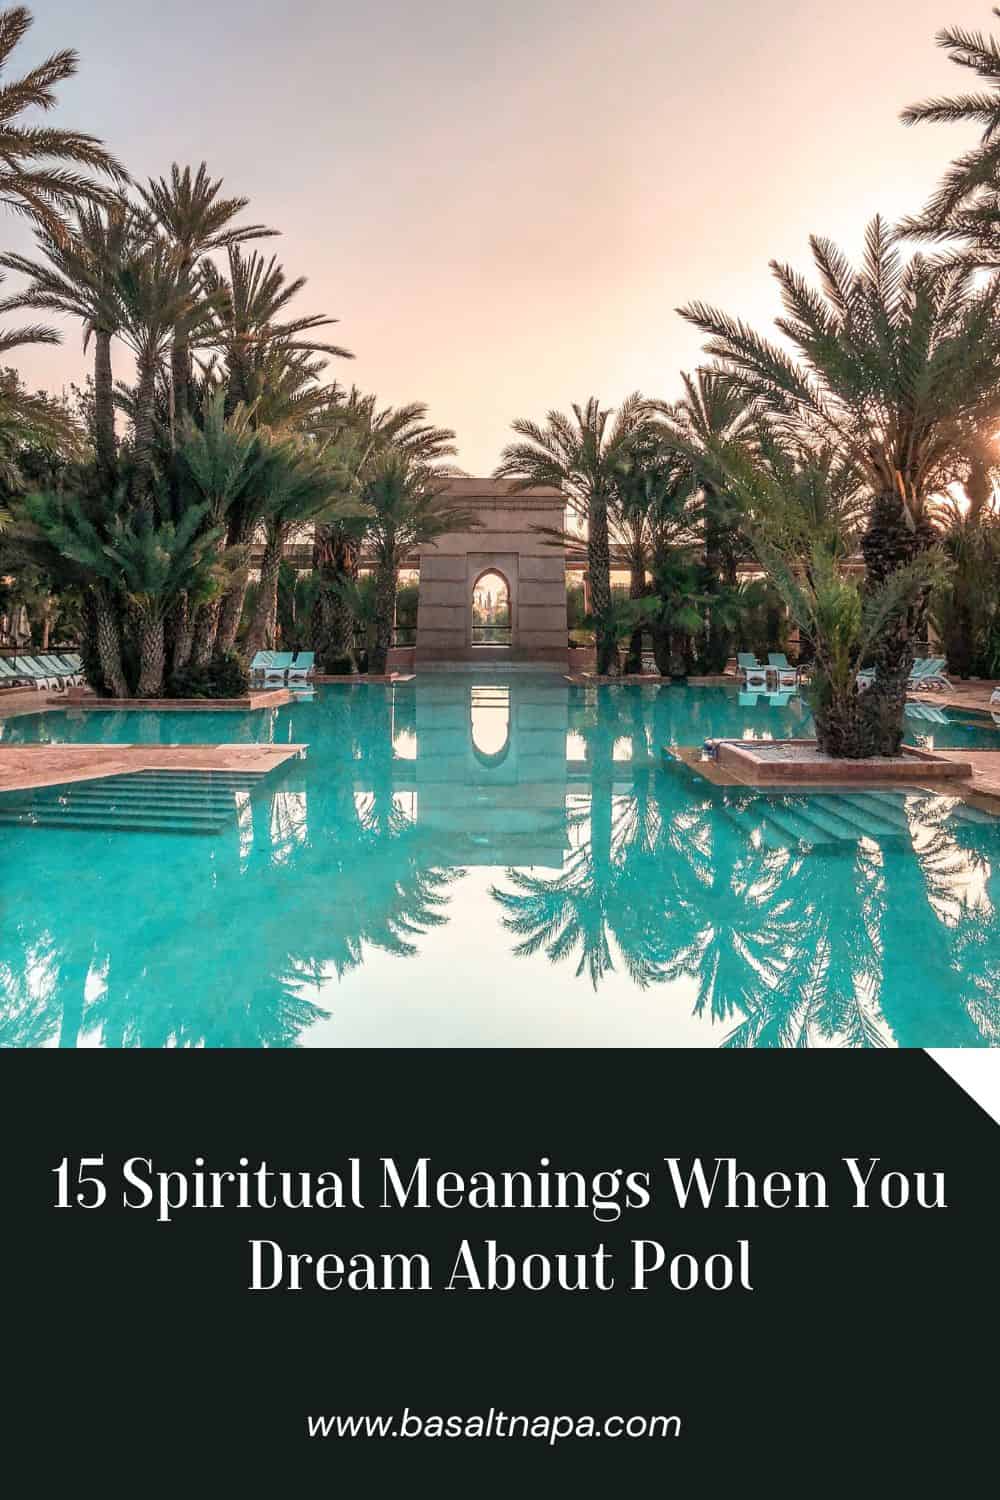 15 Spiritual Meanings When You Dream About Pool